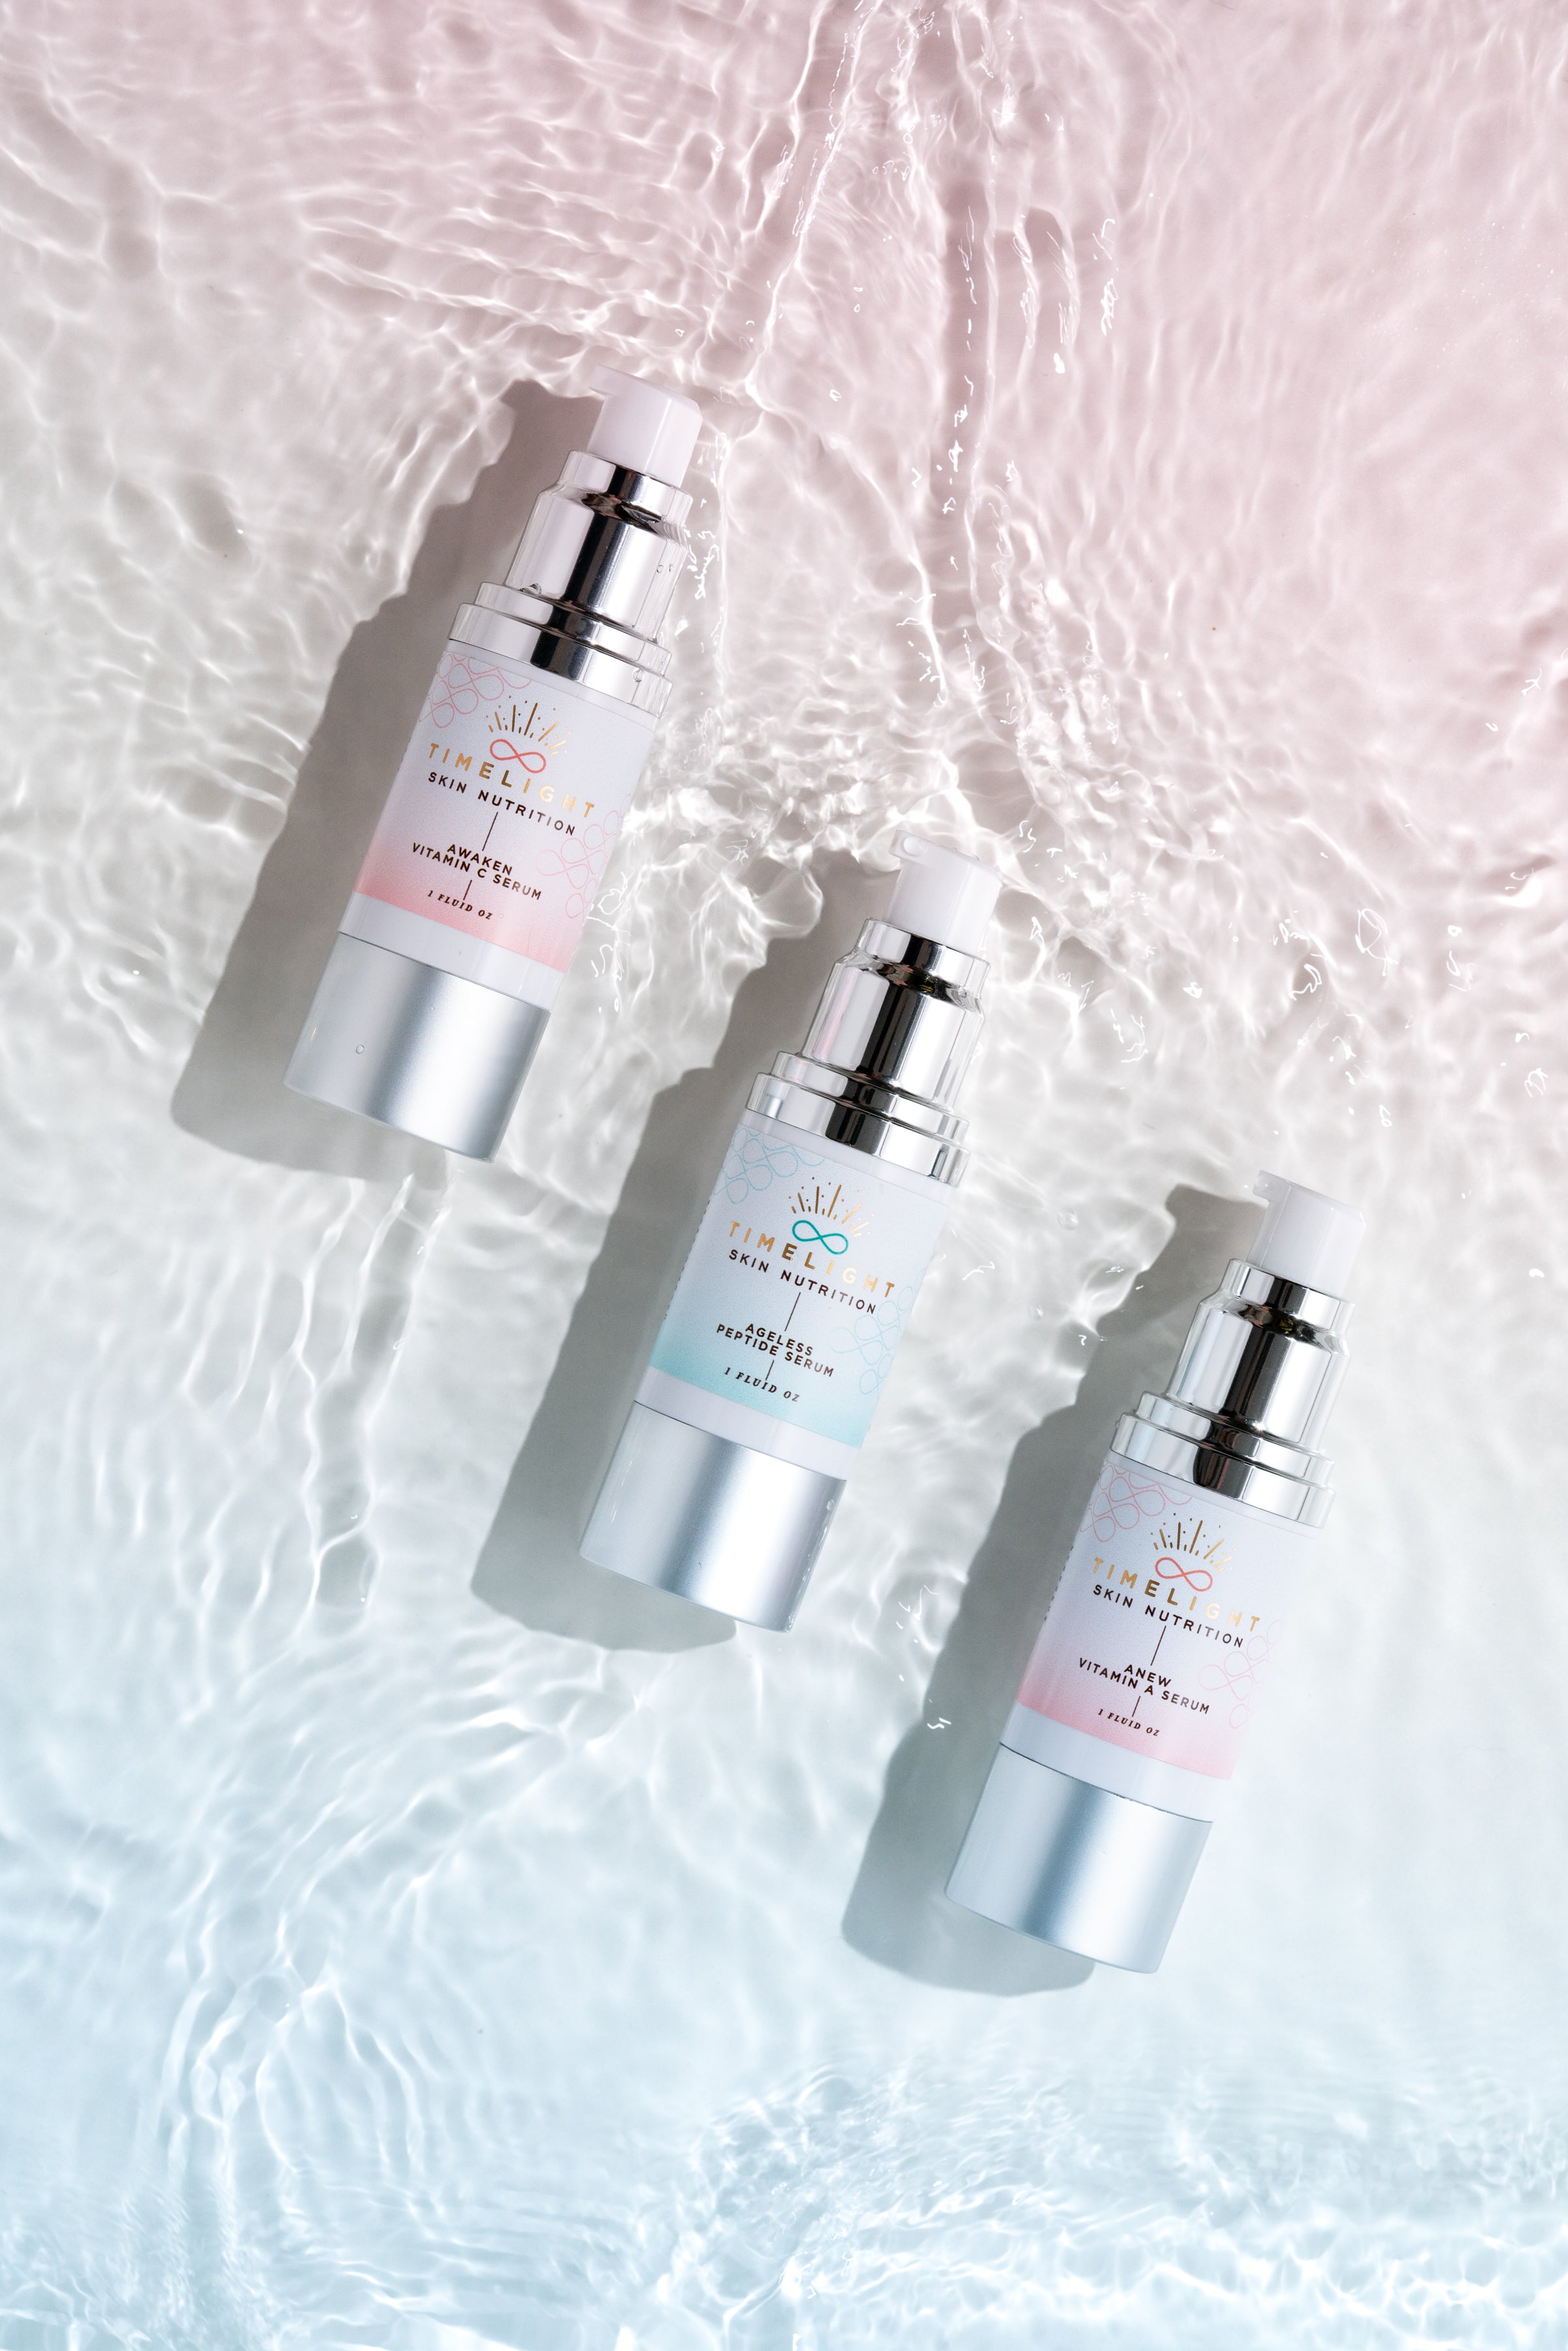 "Immerse Yourself in Radiant Skin: The Trinity of Serums by TimeLight Skin Nutrition, featuring the Electrolyte, Retinaldehyde Slow Release Vitamin A, and Argireline Peptide formulas, floating serenely in a pool of crystal-clear water."